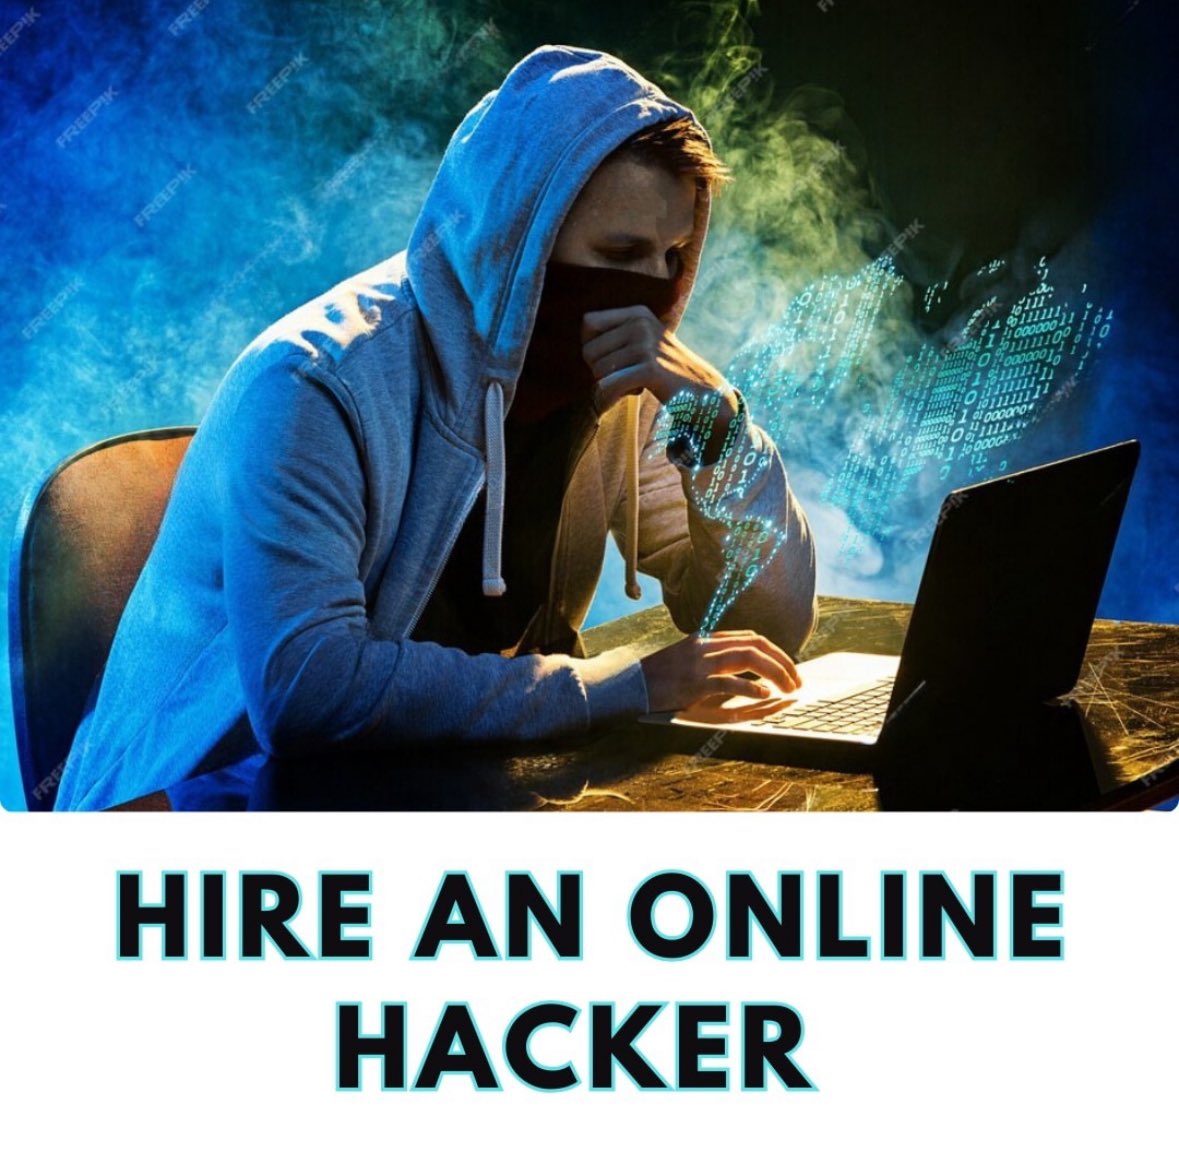 🏴‍☠️we do ethical hacking for good purpose and social media accounts recovery You can learn hacking with us DM us if you have questions related to hacking Tags:-#hackers #hacking #hacker #cybersecurity #ethicalhacking #hack #kalilinux #canada #ethicalhacker #programming #usa